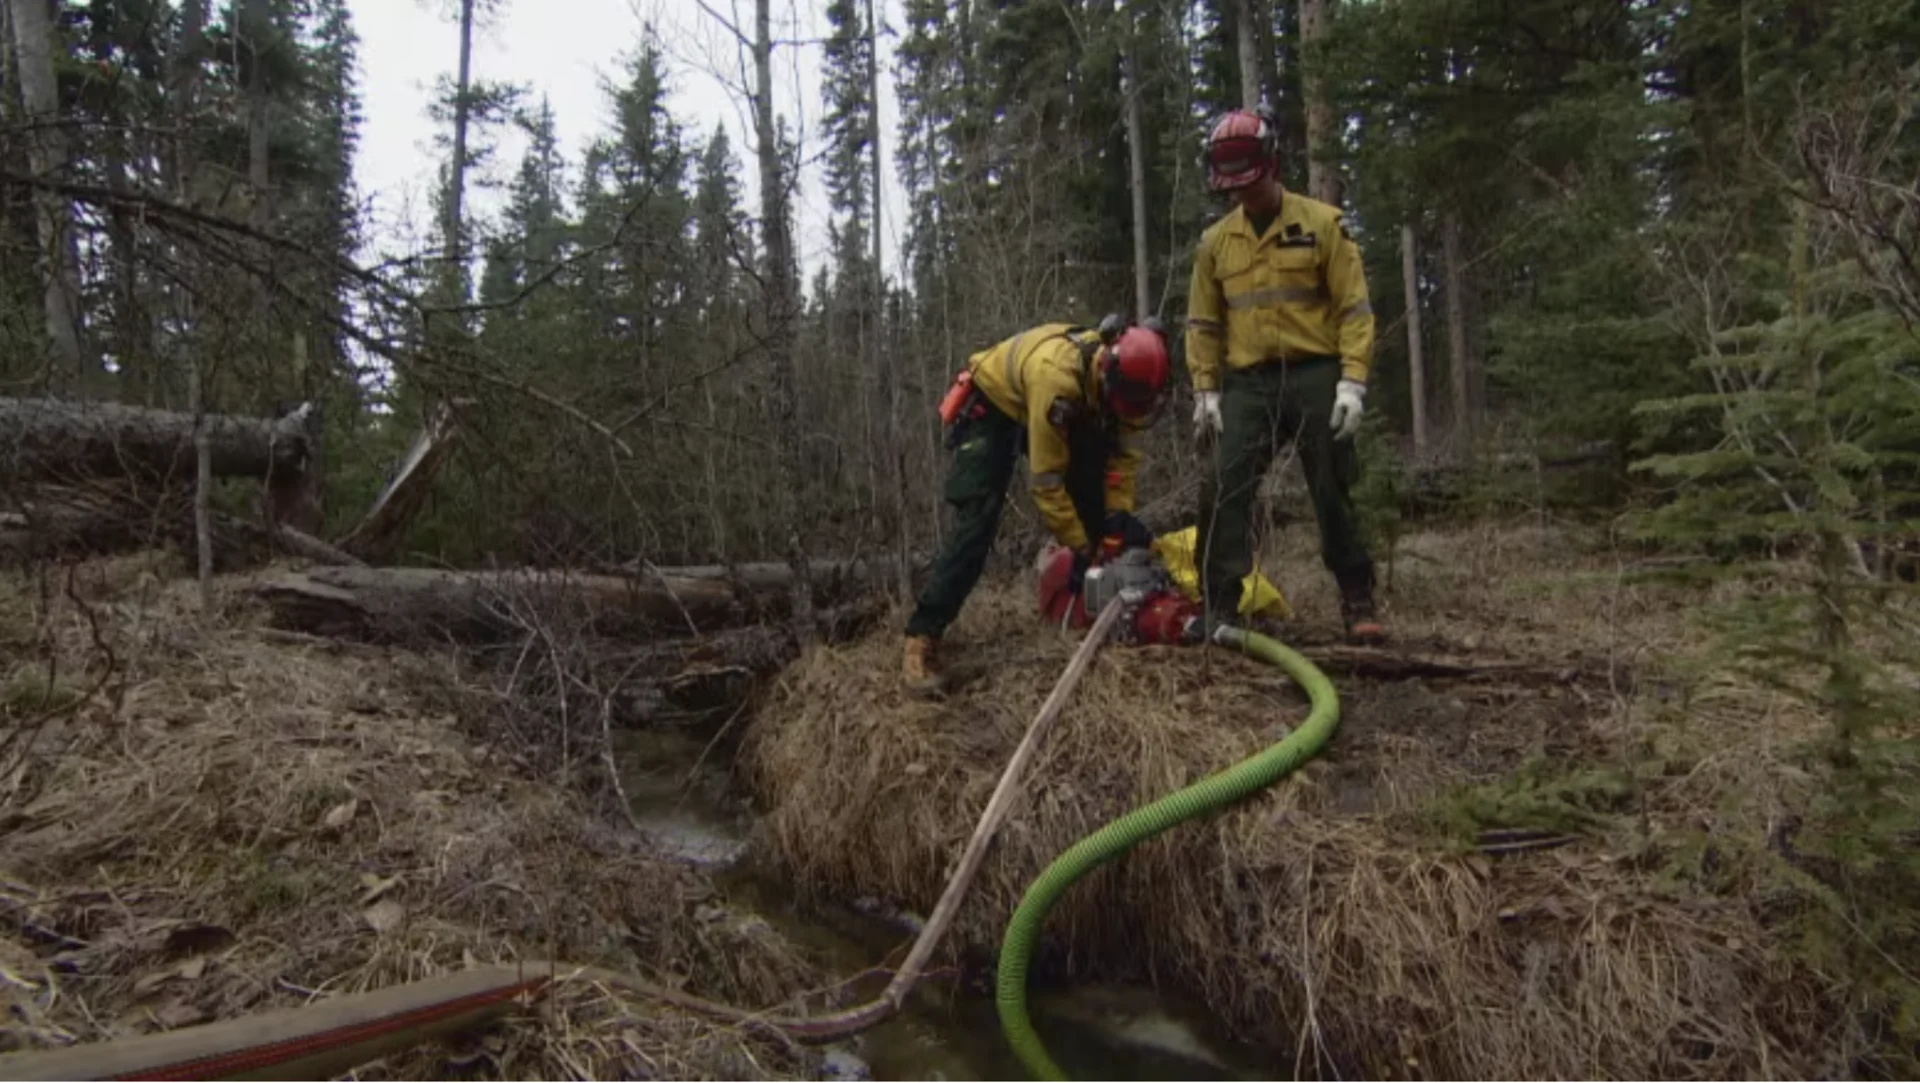 Frozen water and dry conditions a concern for central Alberta firefighting dept.